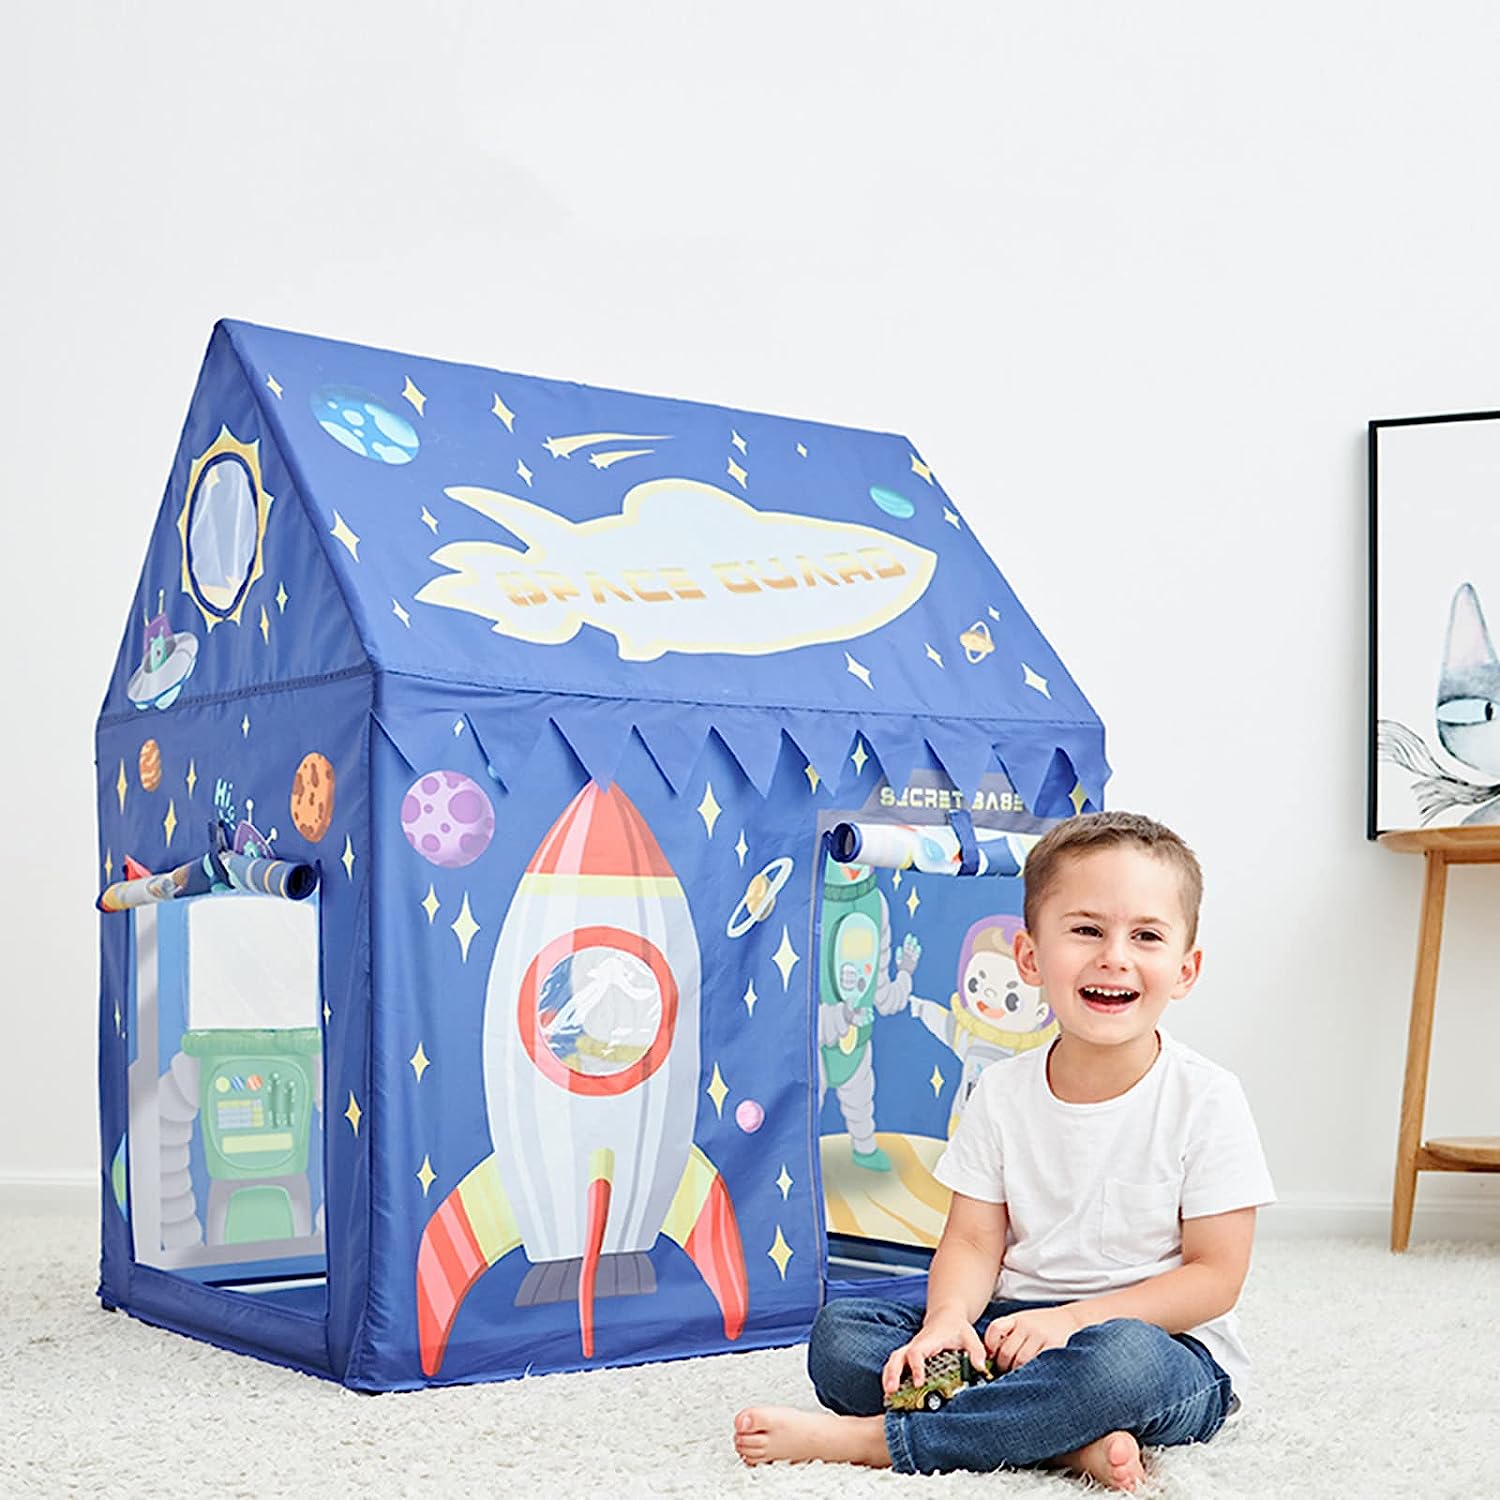 Blue Kids Wendy House Astronaut Play Tent